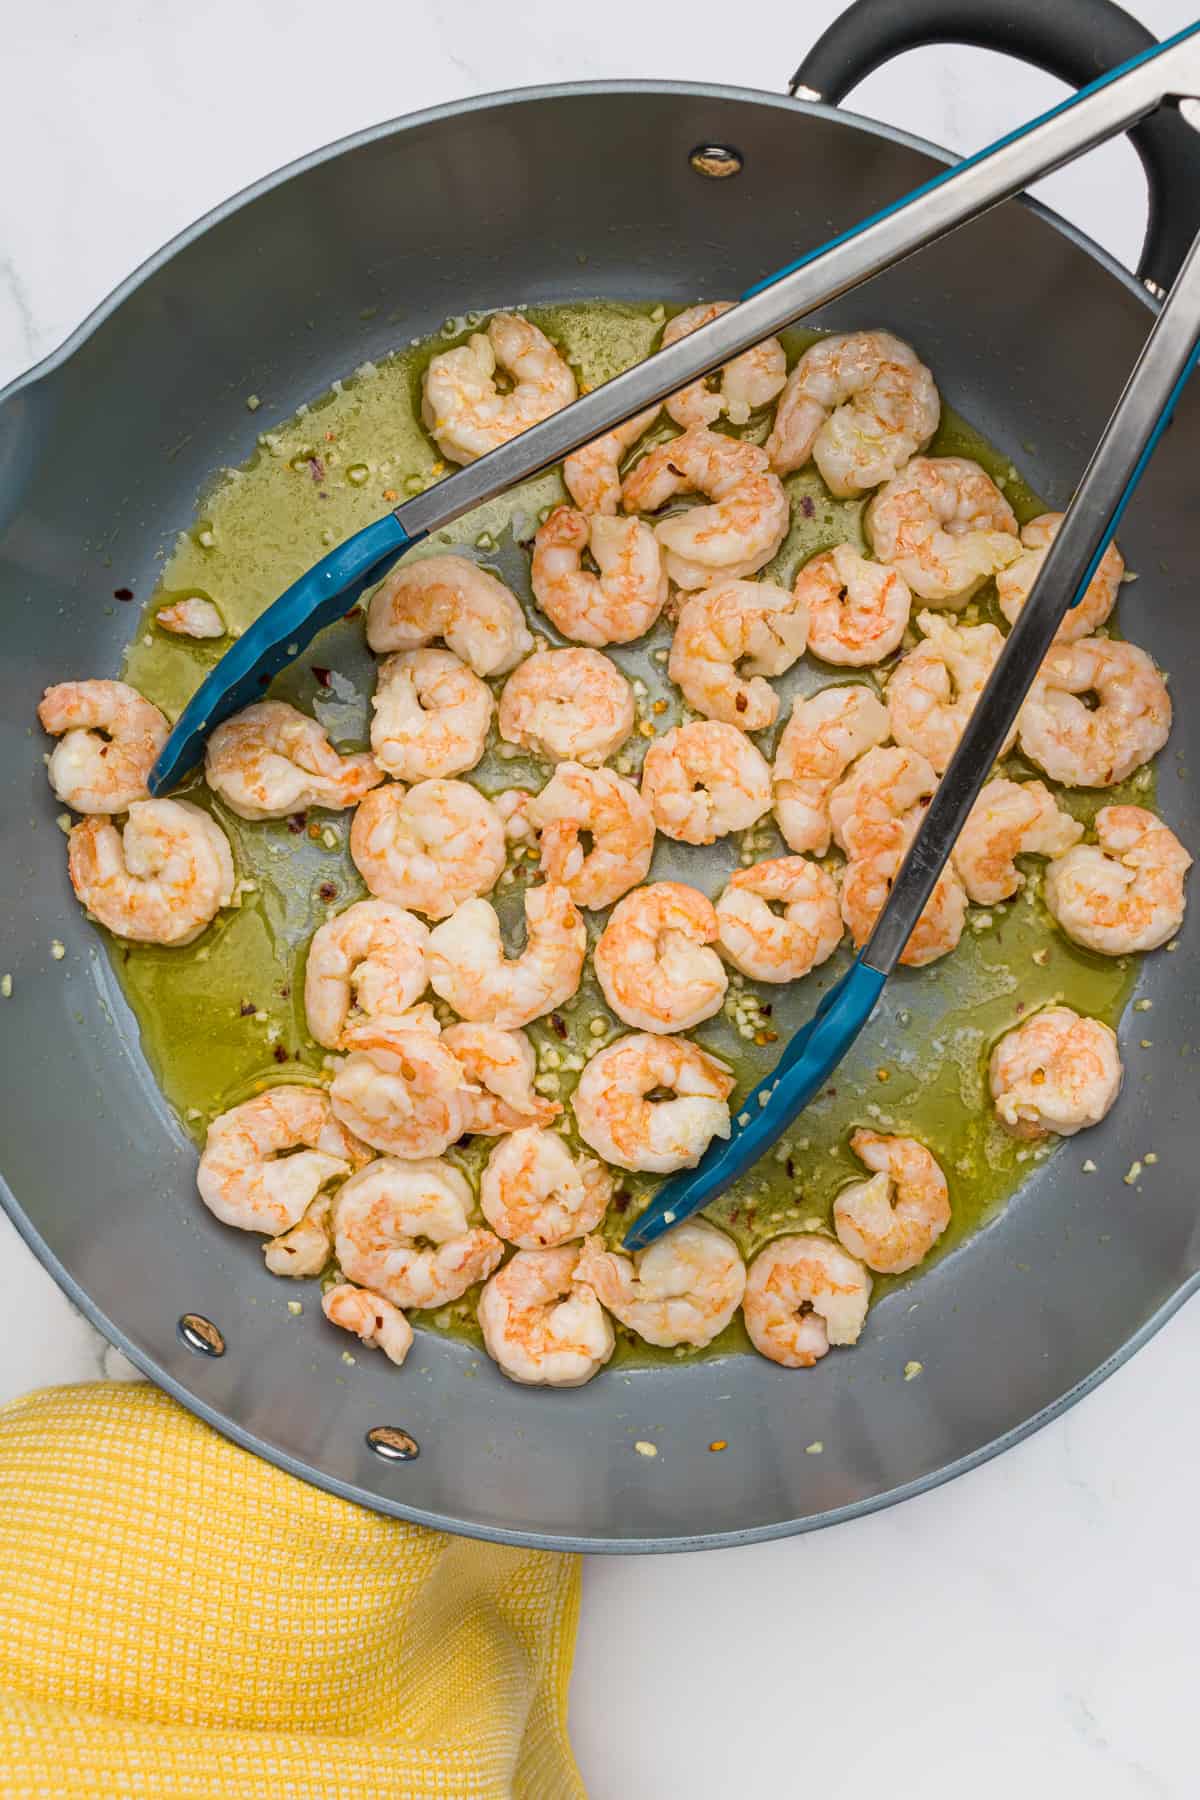 Shrimp cooking in oil and butter with minced garlic in a skillet with tongs.